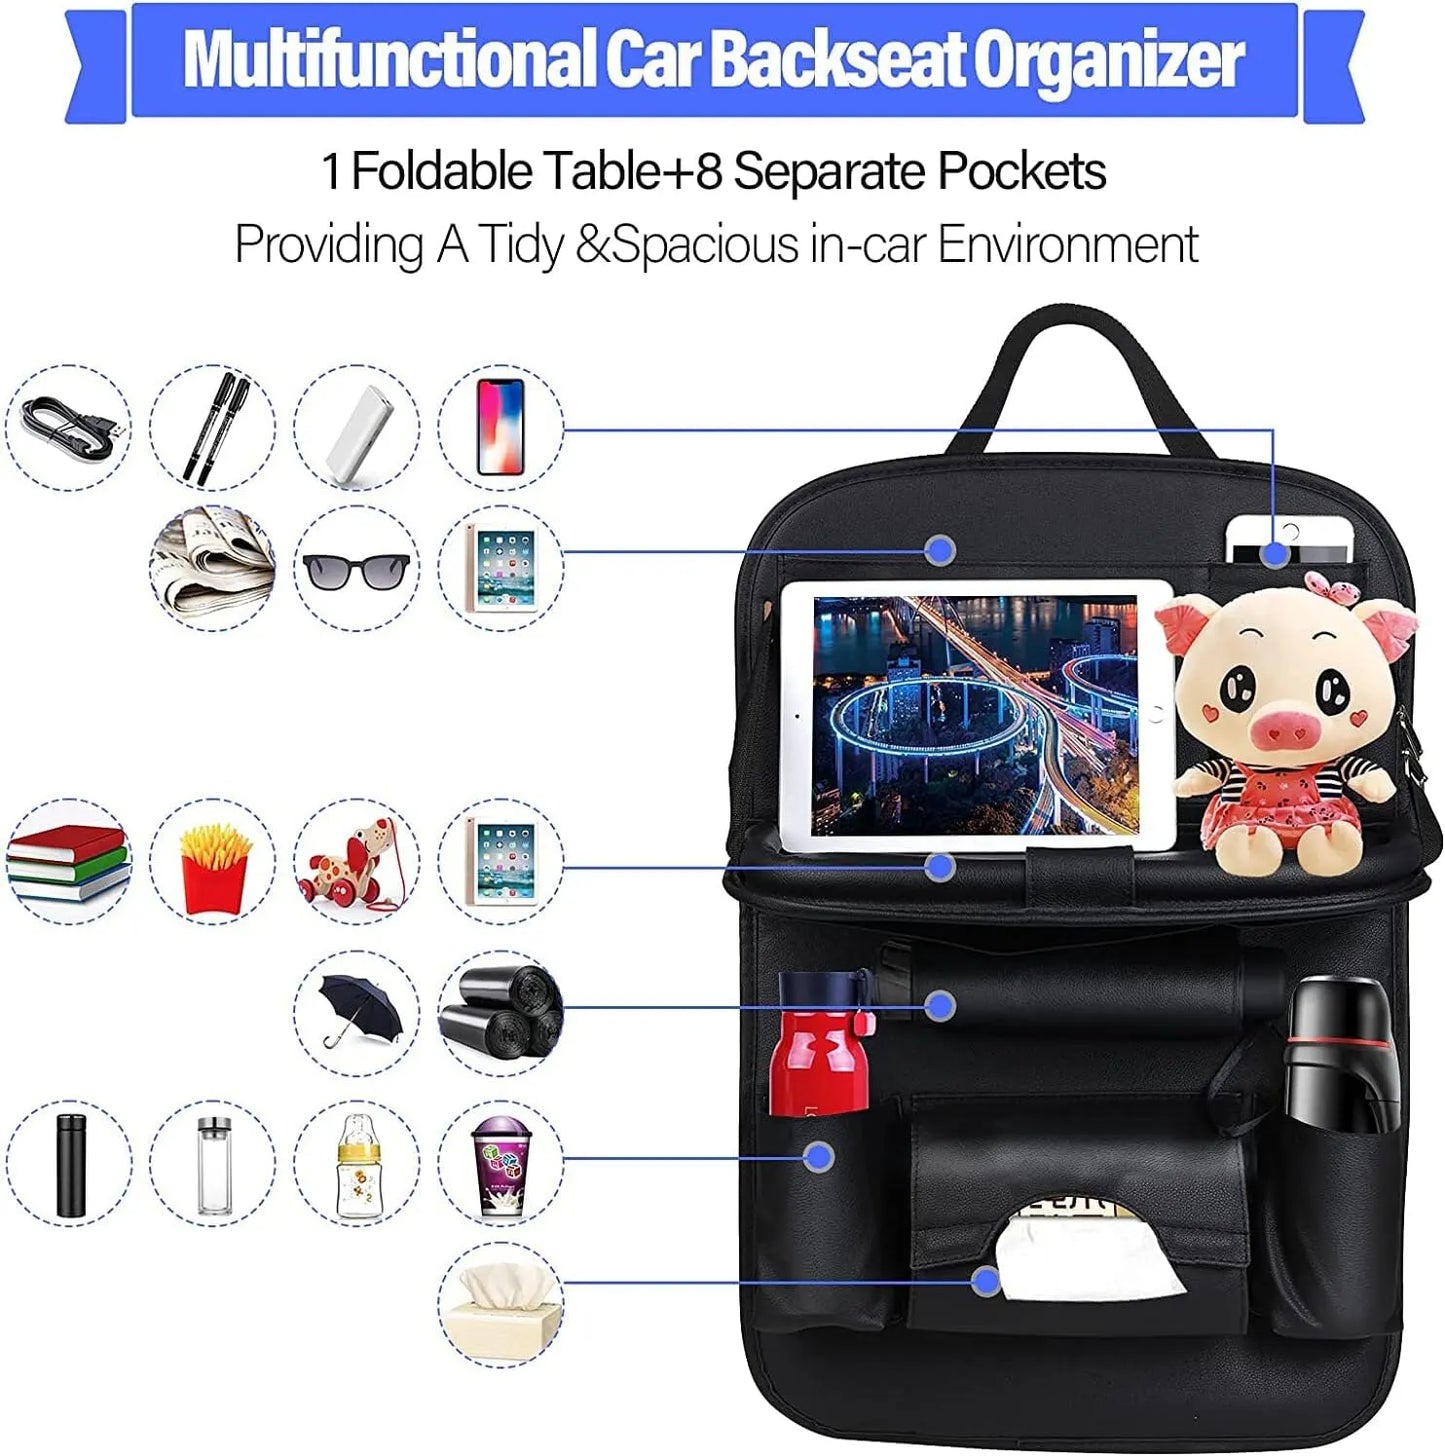 Multifunctional Car Backseat Organizer: The image displays the organizer with a foldable table and eight separate pockets. Various items like toys, bottles, and electronic devices are stored, showcasing the organizer’s functionality and storage capacity.